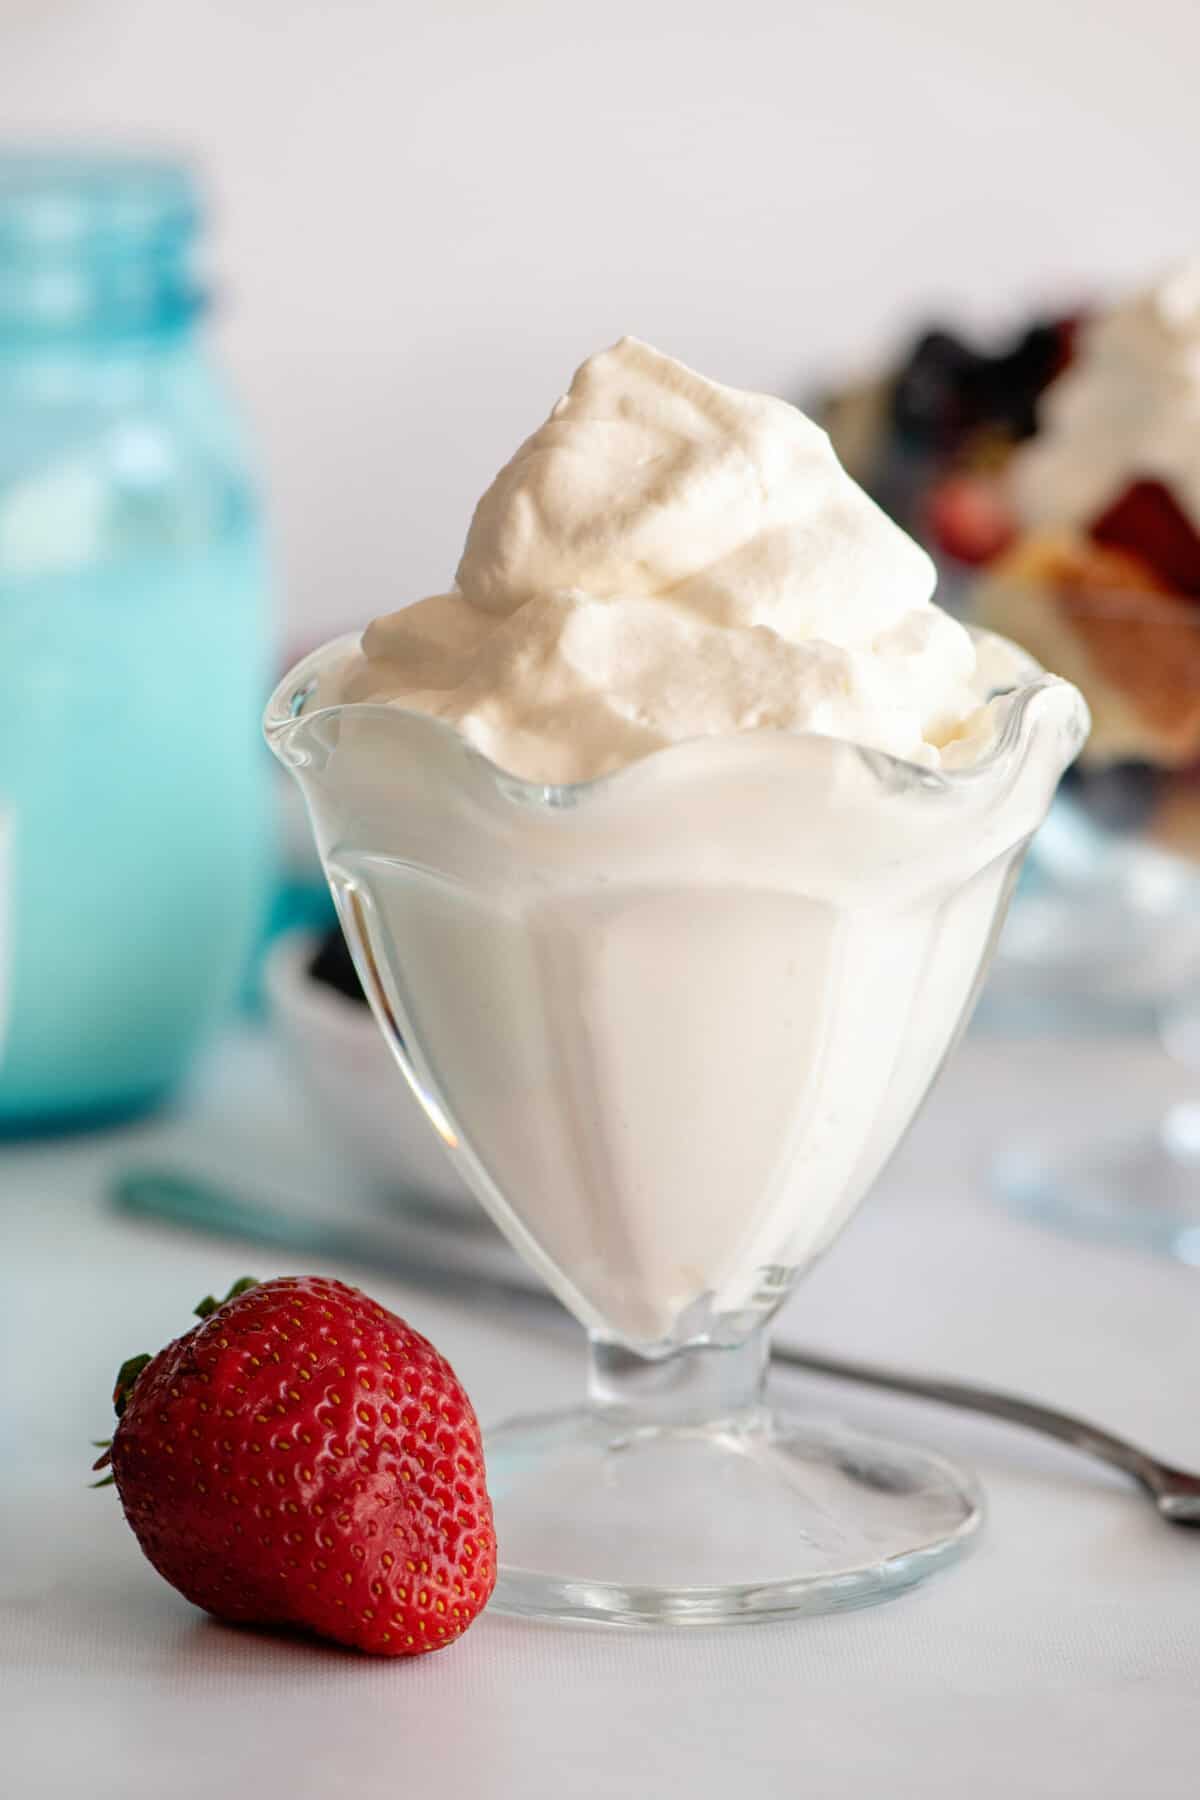 Glass filled with homemade whipped cream.